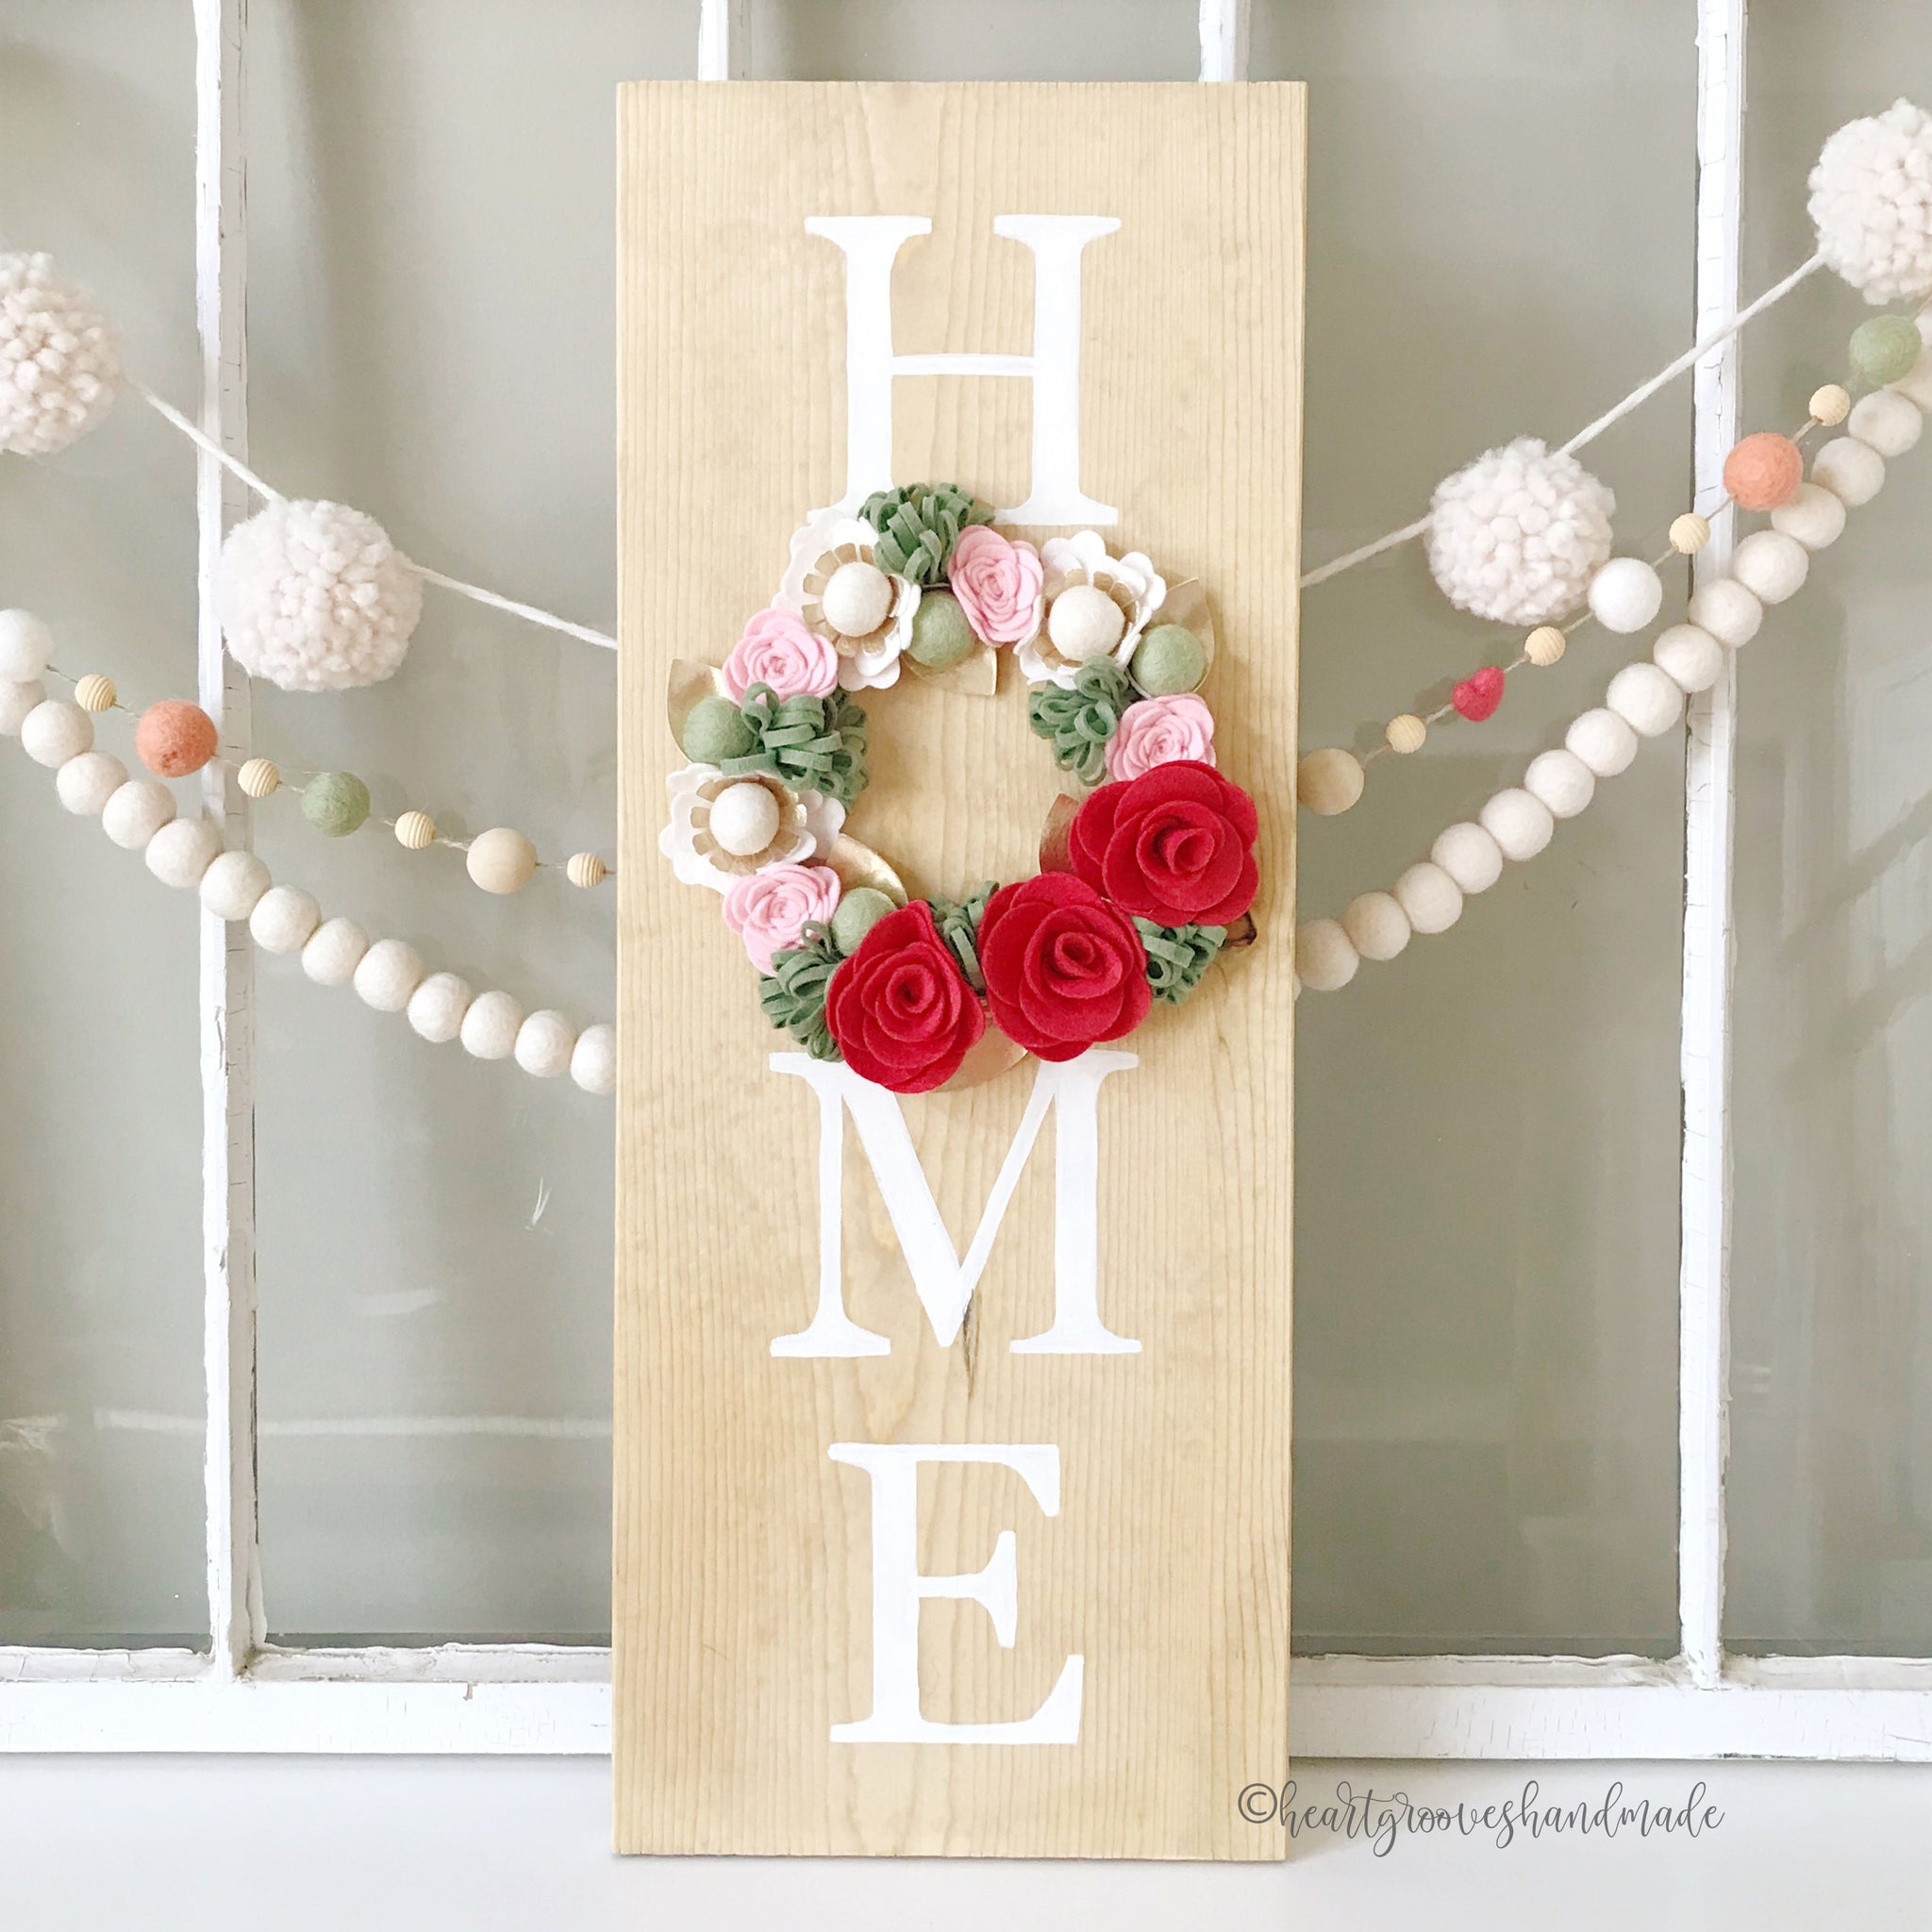 DIY Felt Flower Wreath * Moms and Crafters